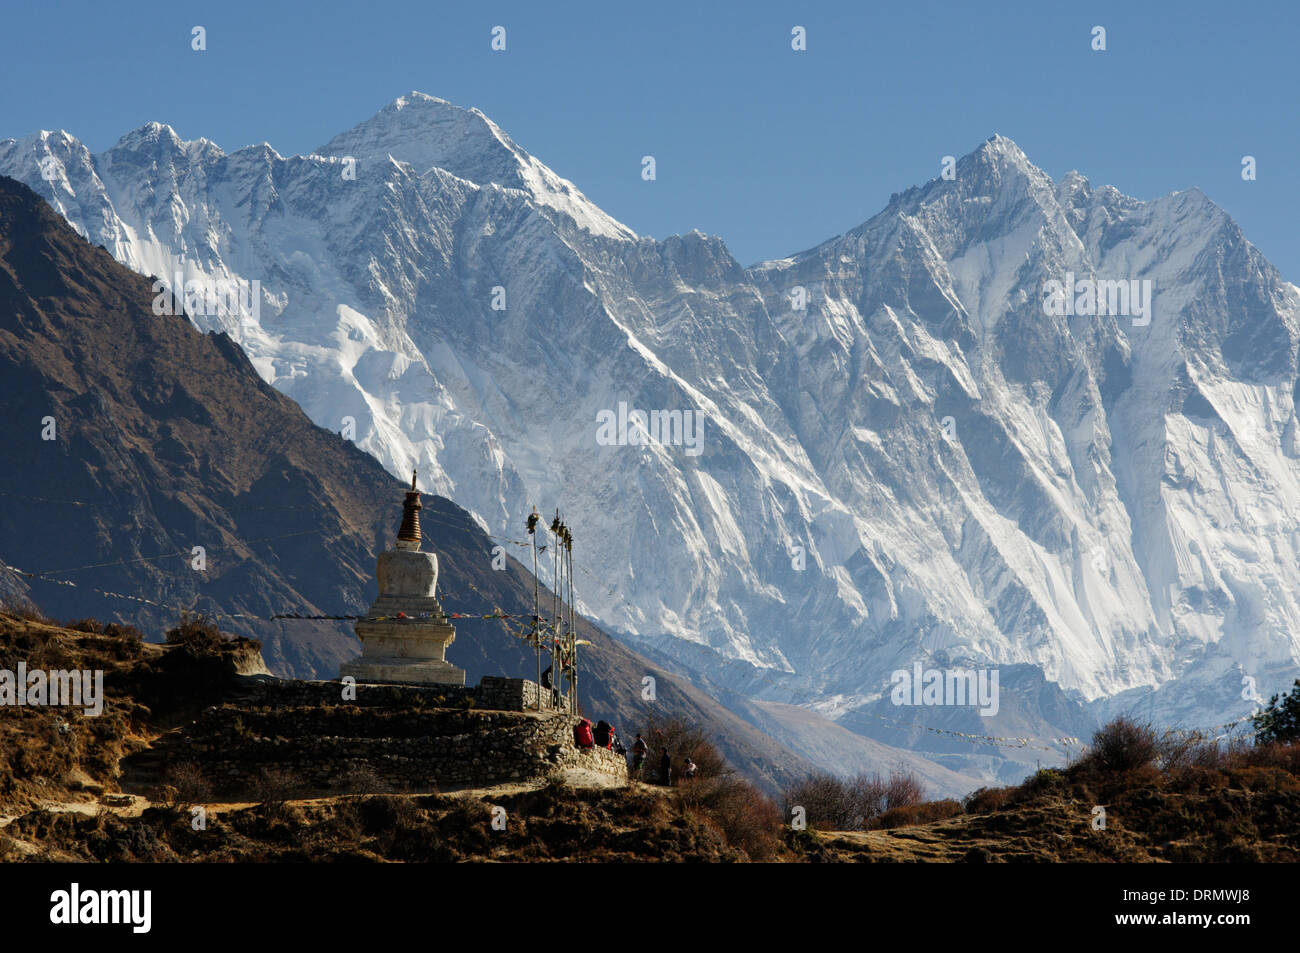 A stupa on the path above Namche Bazaar on the everest base camp trek, with the everest group, Lhotse & Mount Everest beyond Stock Photo